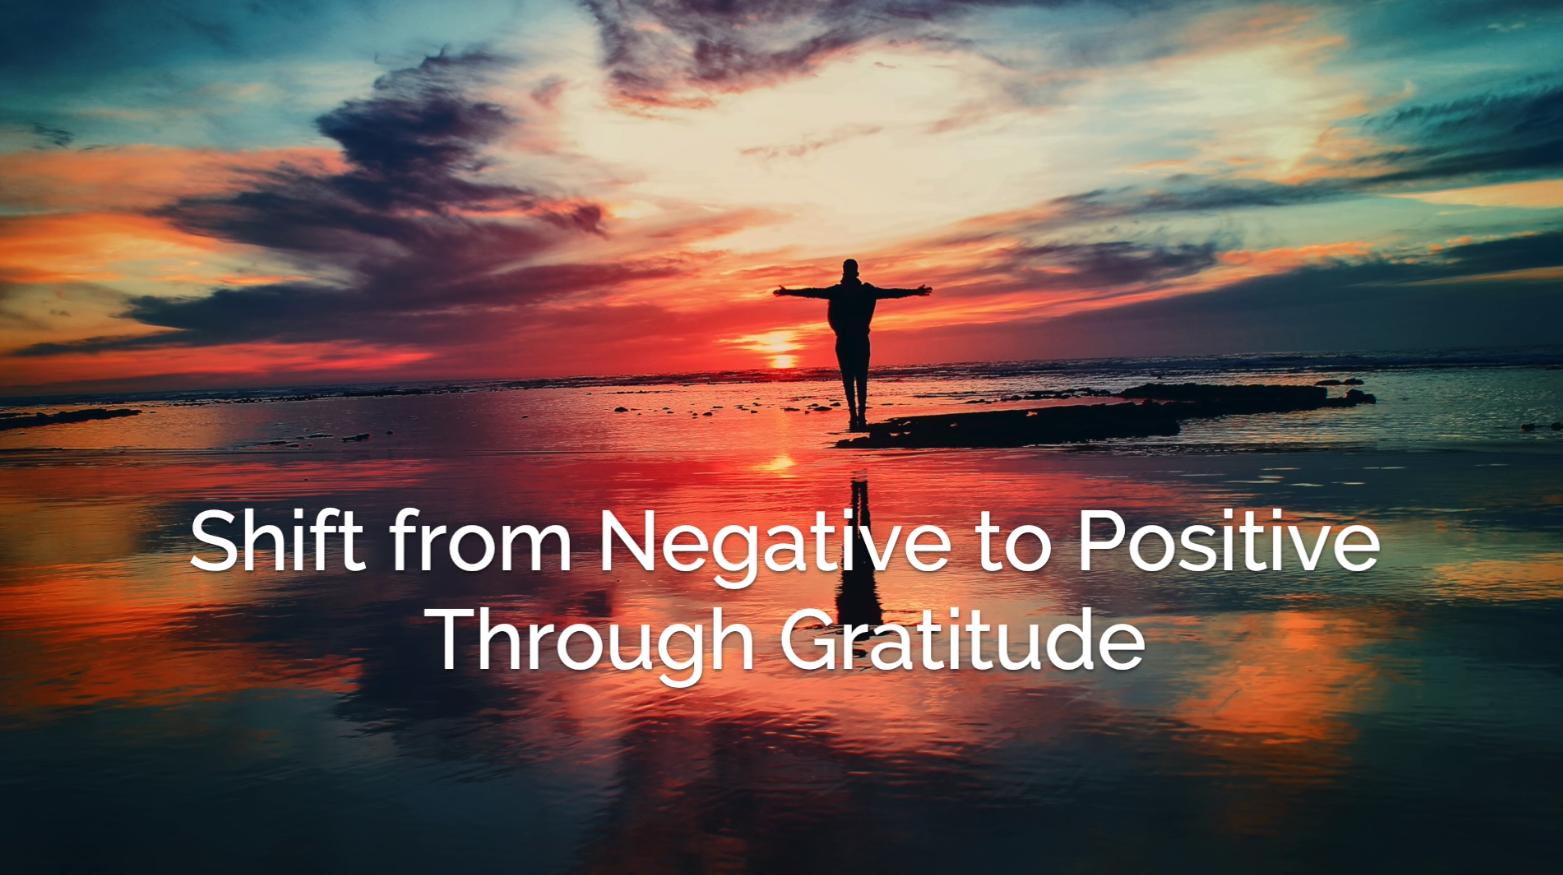 Shift from Negative to Positive Through Gratitude